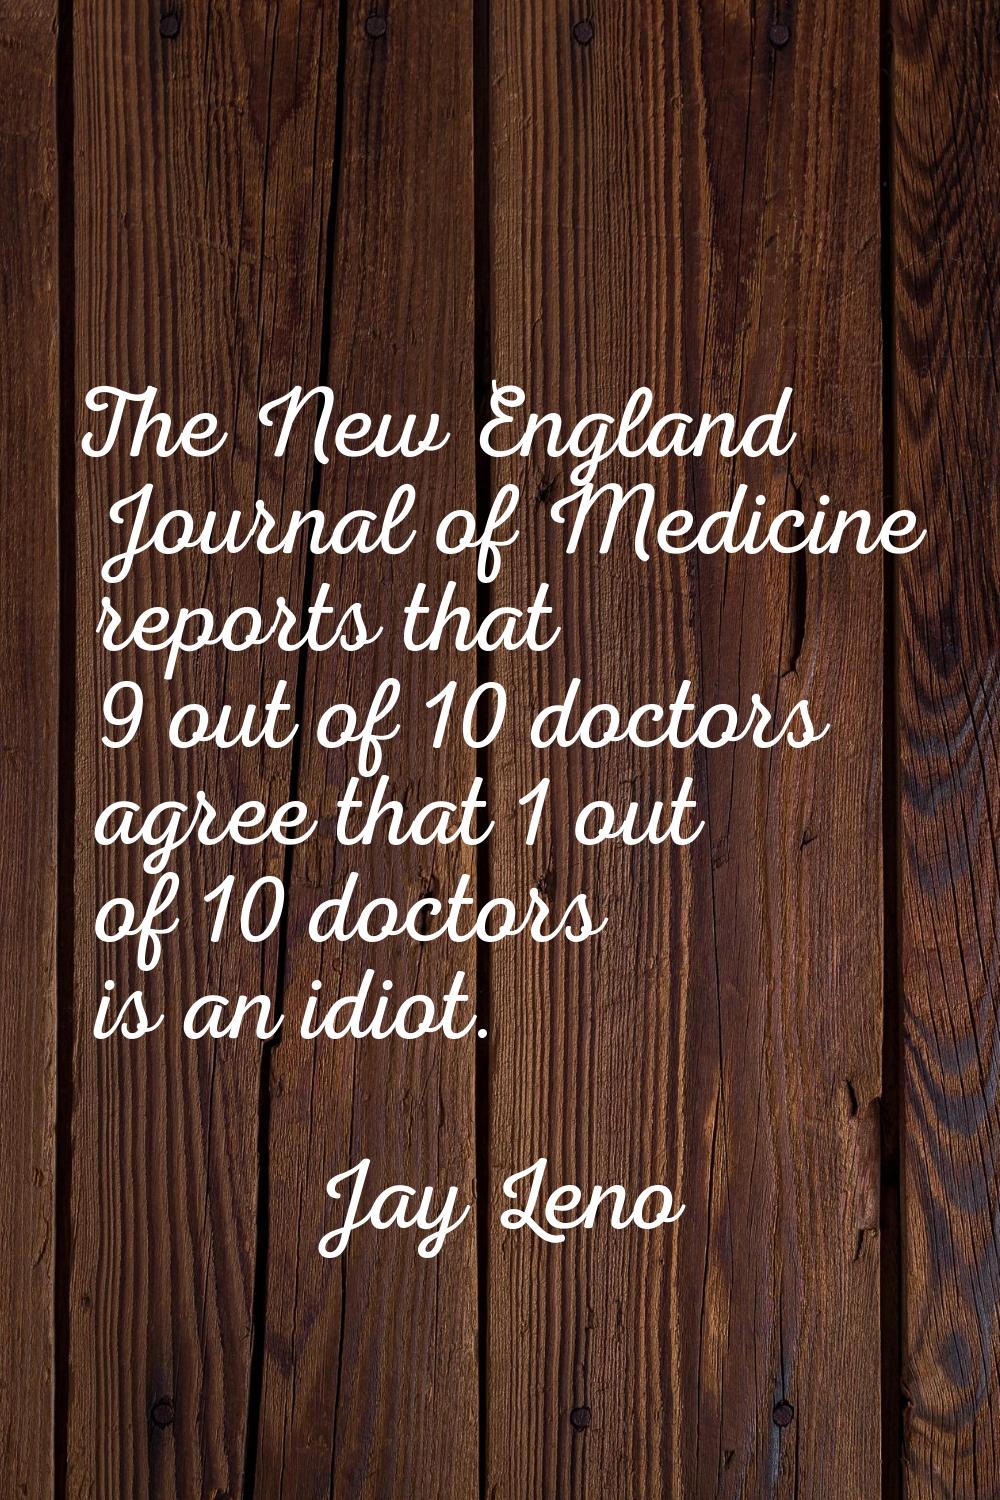 The New England Journal of Medicine reports that 9 out of 10 doctors agree that 1 out of 10 doctors